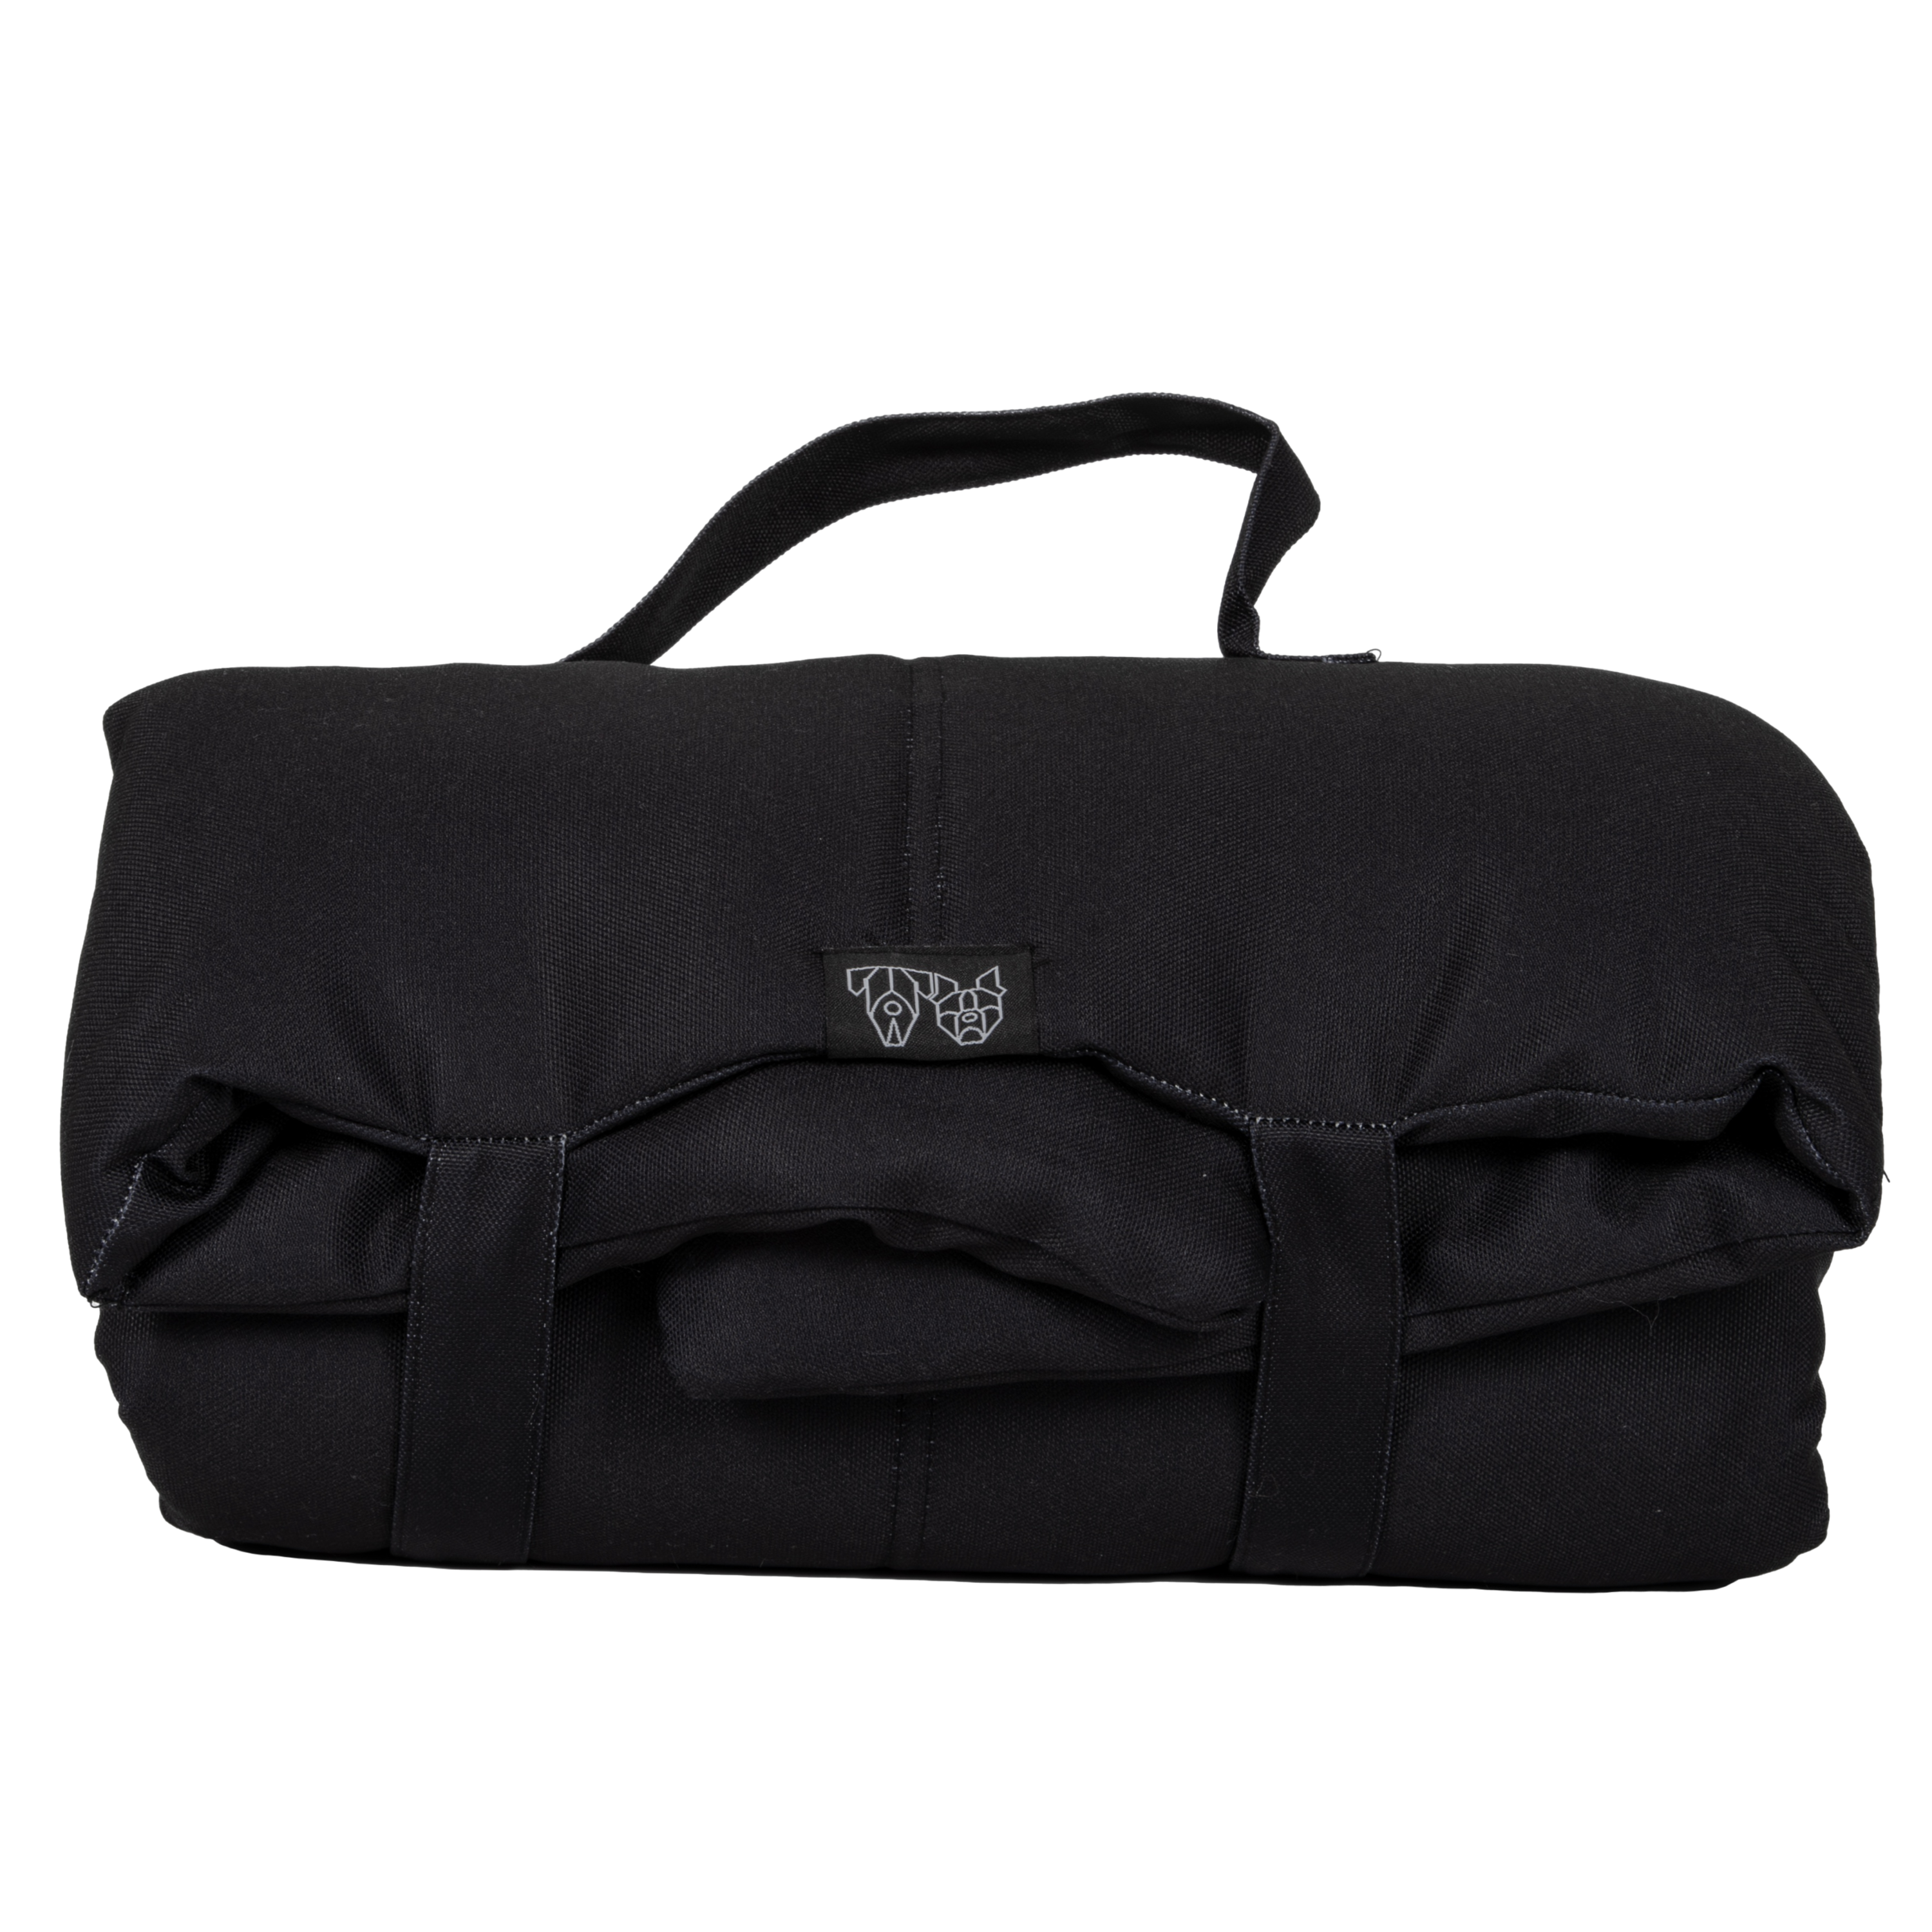 On-The-Go-Pet-Mat-Black-Rolled.png__PID:d8acd1db-155c-4aed-87df-6acf22b8fafc